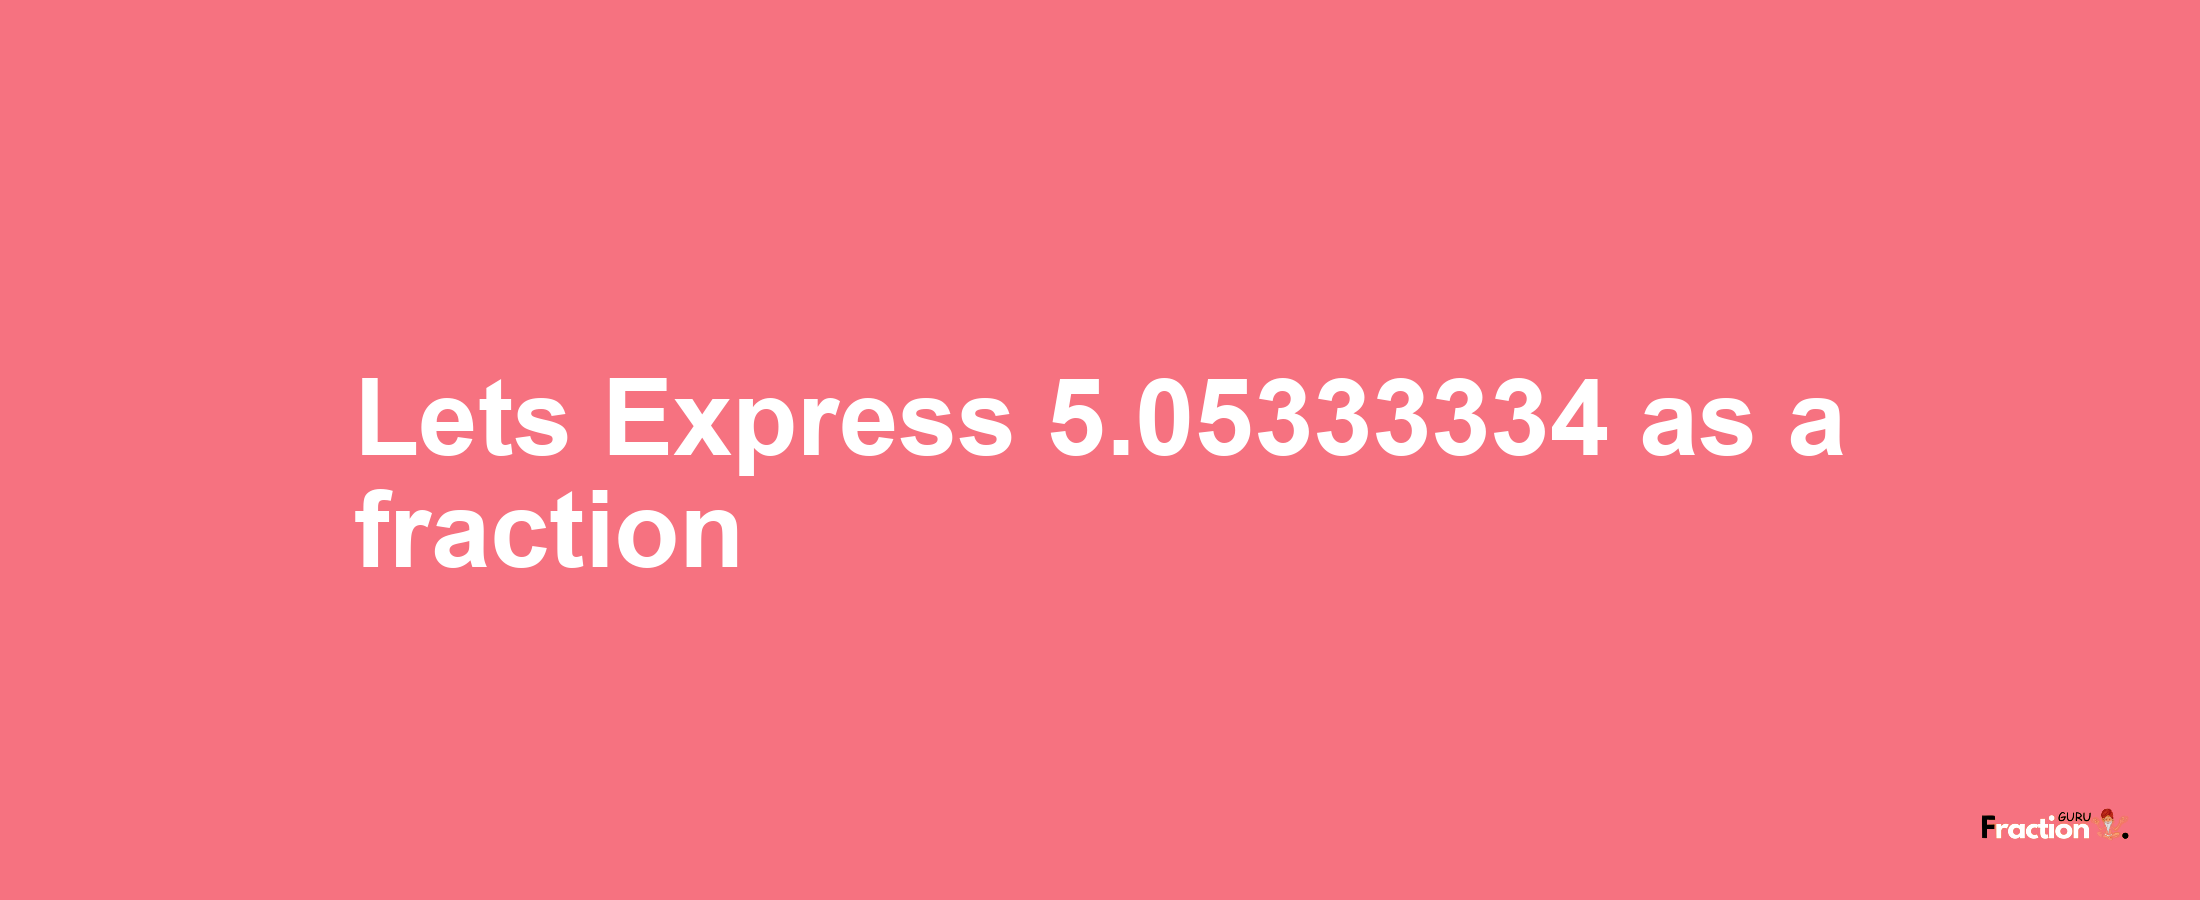 Lets Express 5.05333334 as afraction